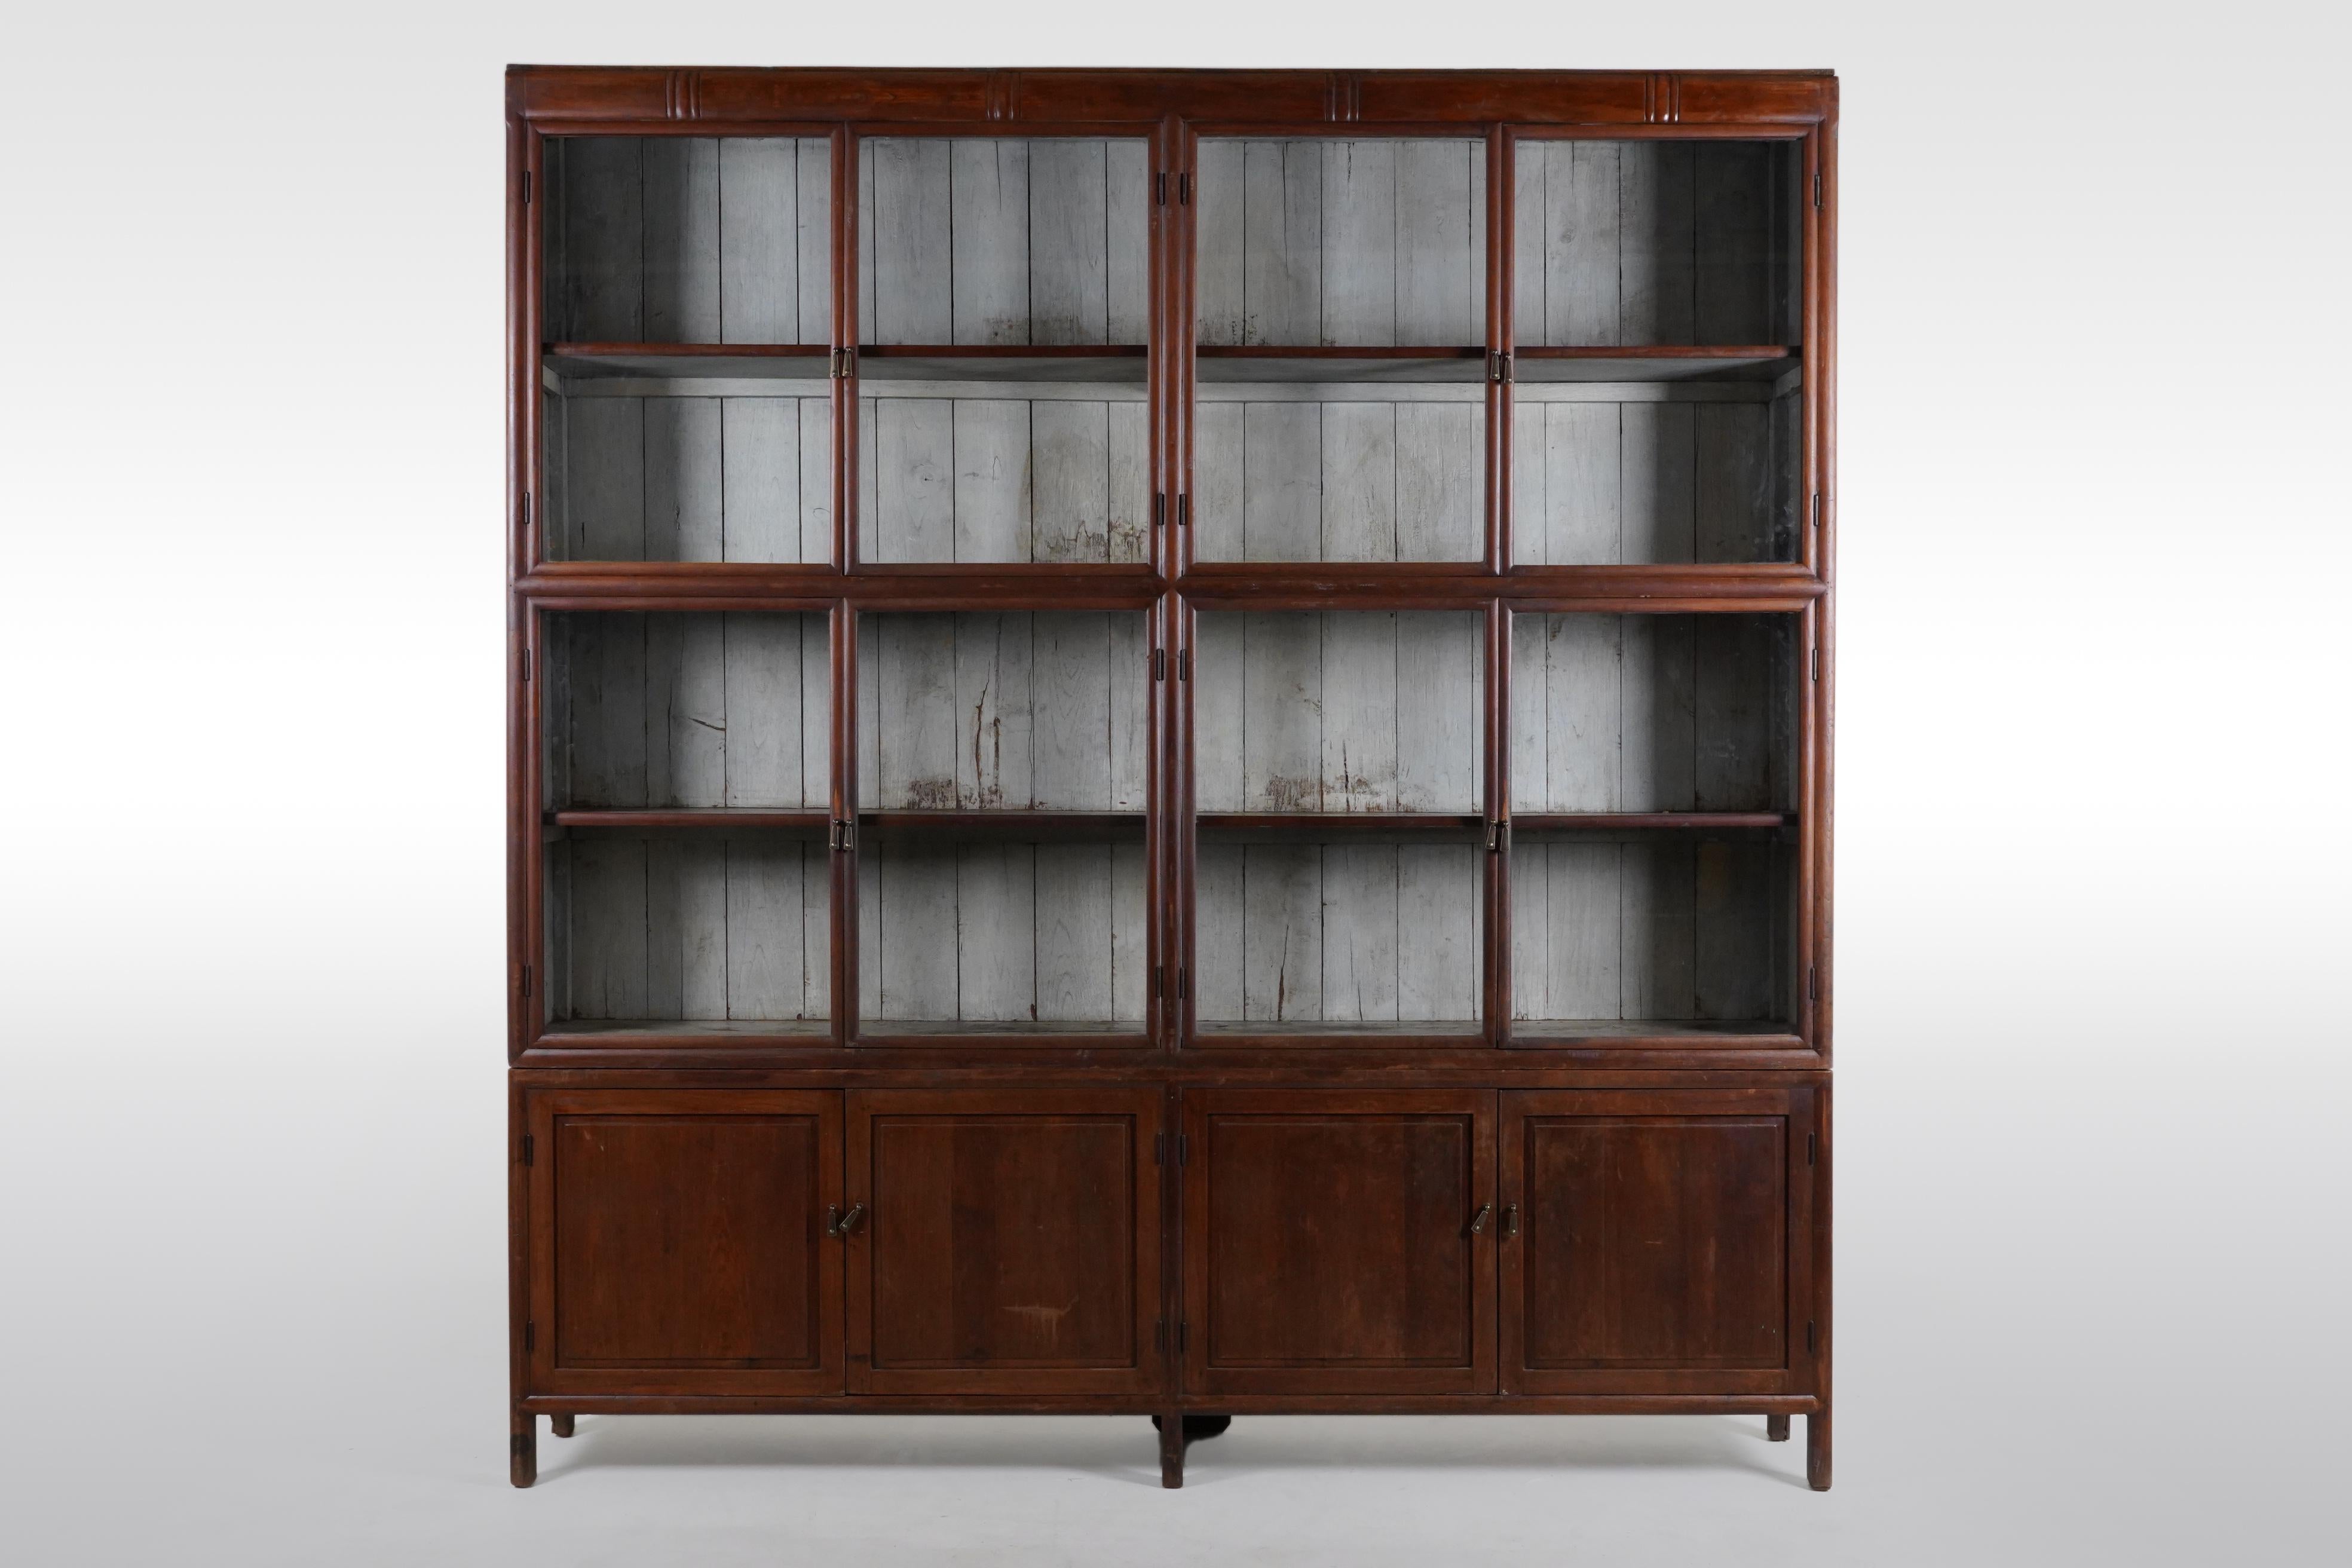 This impressively book cabinet was made from solid Teak wood and dates to the 1940's. The cabinet is made in two sections; an upper part with  glass doors and four levels for display of books and artifacts and a lower part with solid hardwood doors